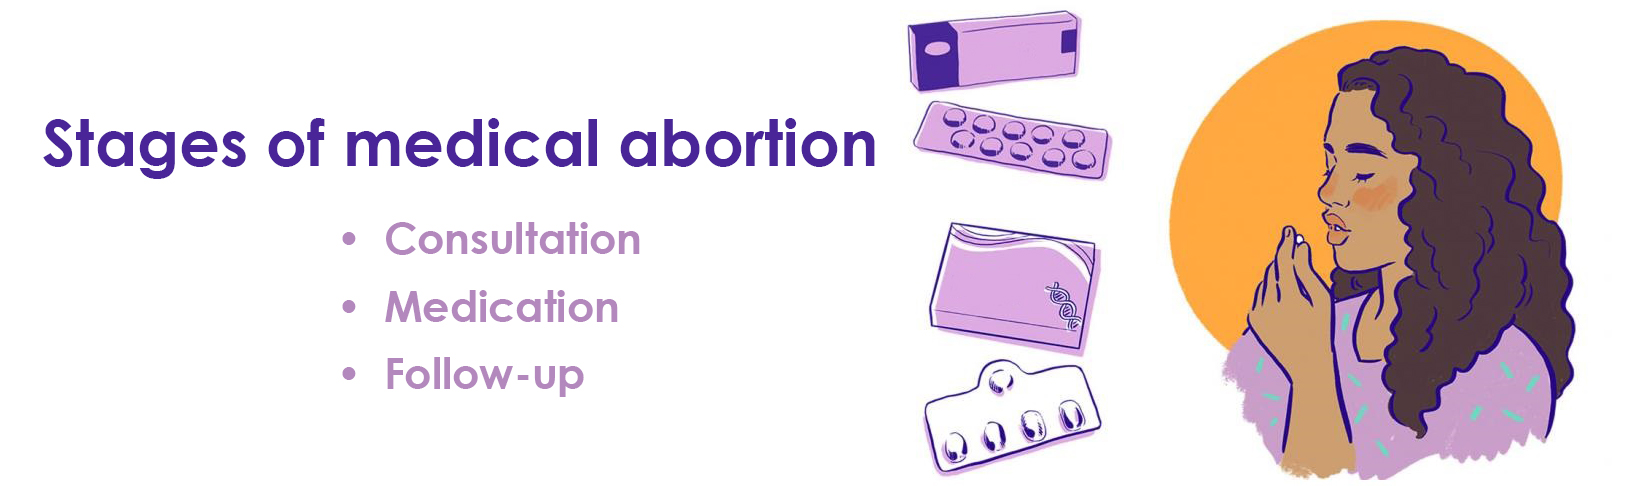 Stages of medical abortion in Kharkiv